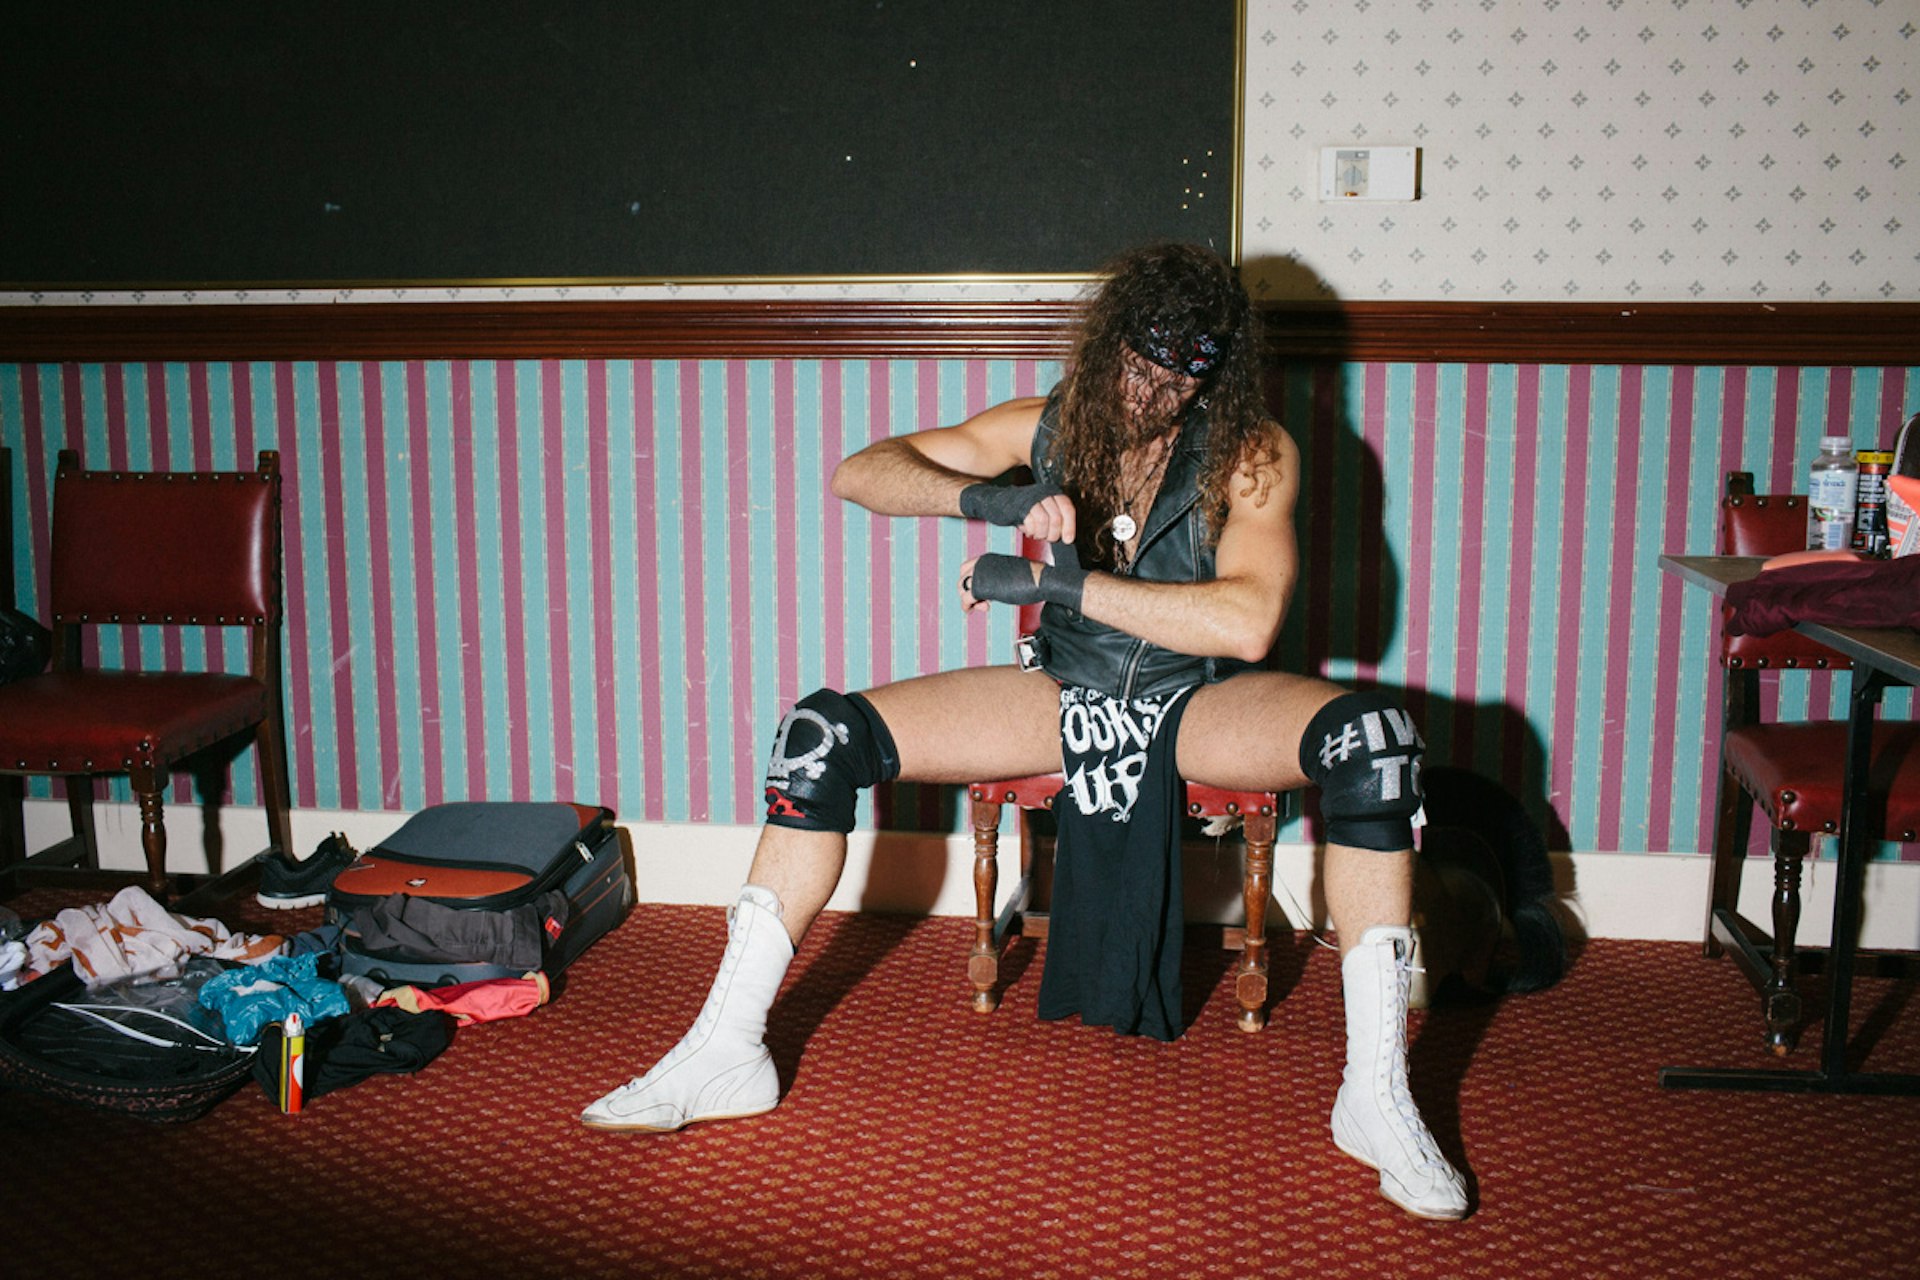 Pro Wrestling Subjective's Steve Hannah gets into character as his pirate alter-ego, Steve Valentino, moments before the show.